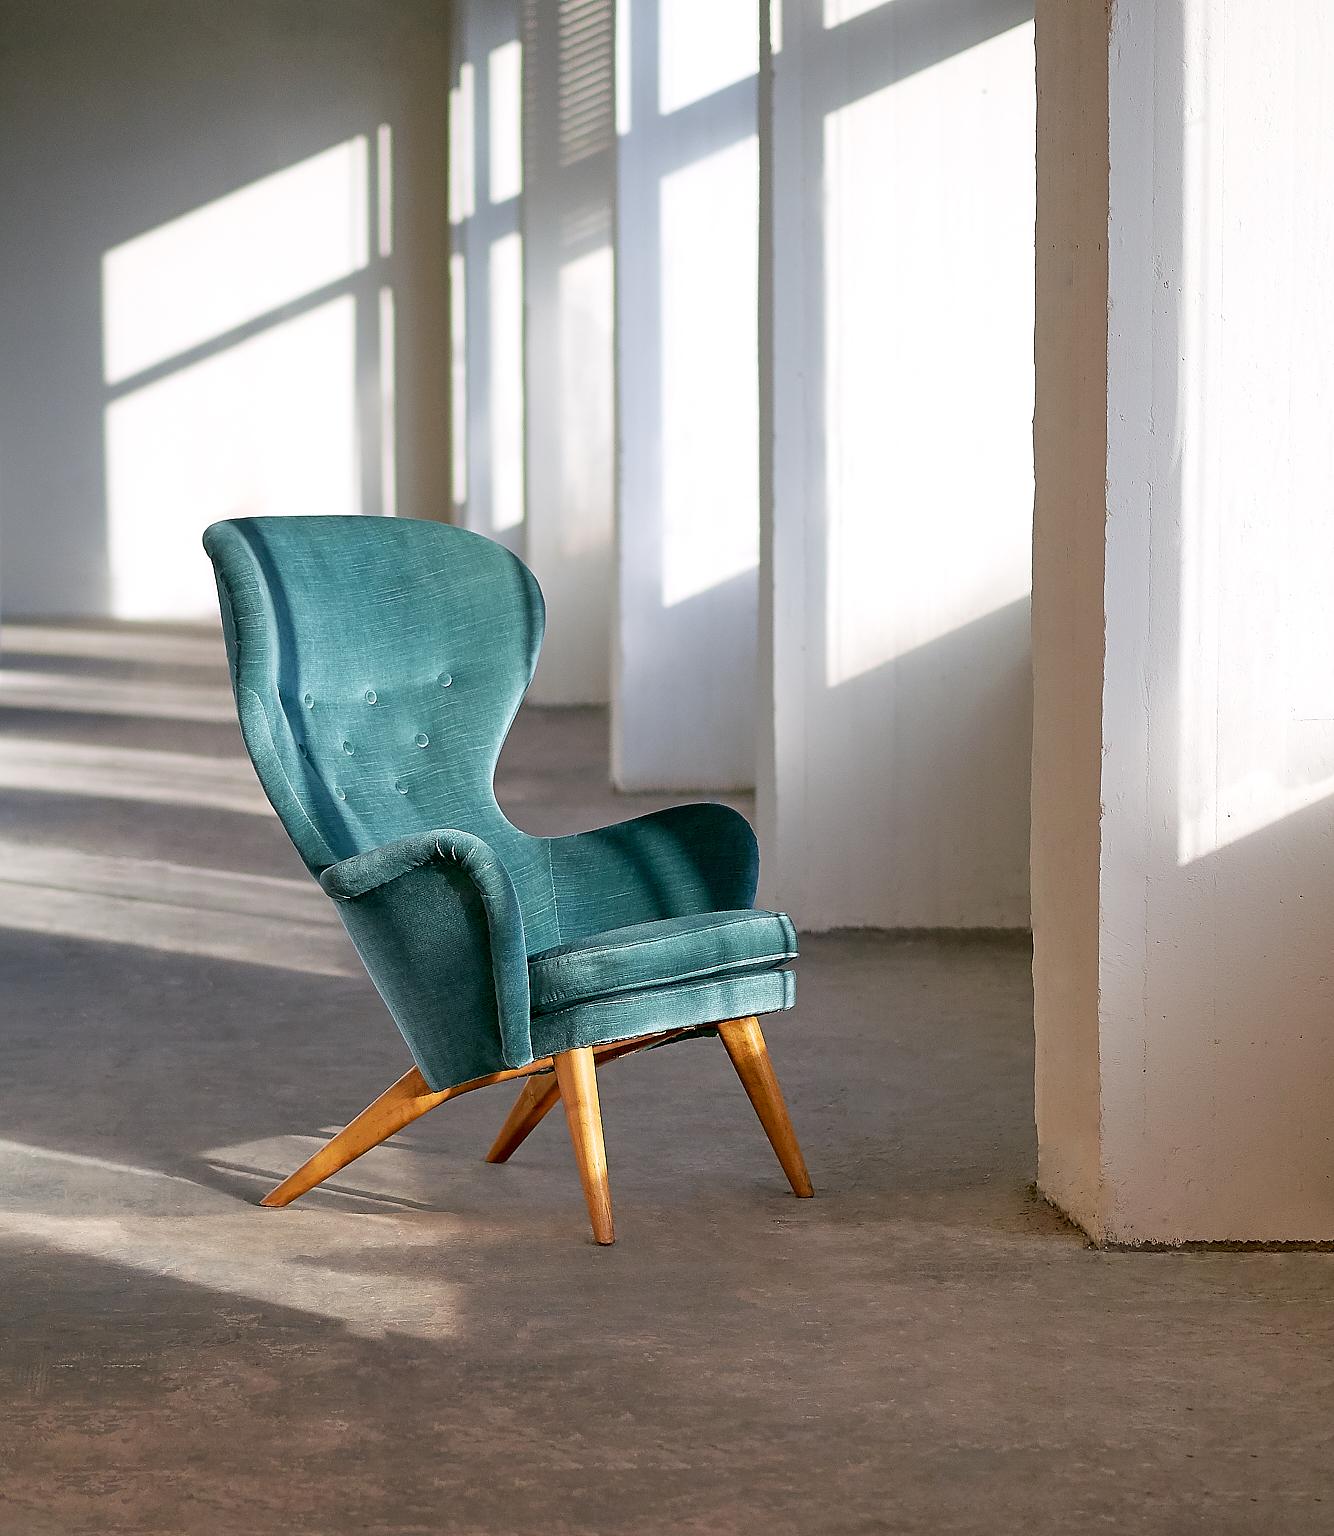 This rare armchair was designed by Carl-Gustav Hiort Af Ornäs and produced by his own company Hiort Tuote Puunveisto in 1952. This model was called Siesta and is the Finnish designer's most celebrated design. With its outward pointing curved legs,